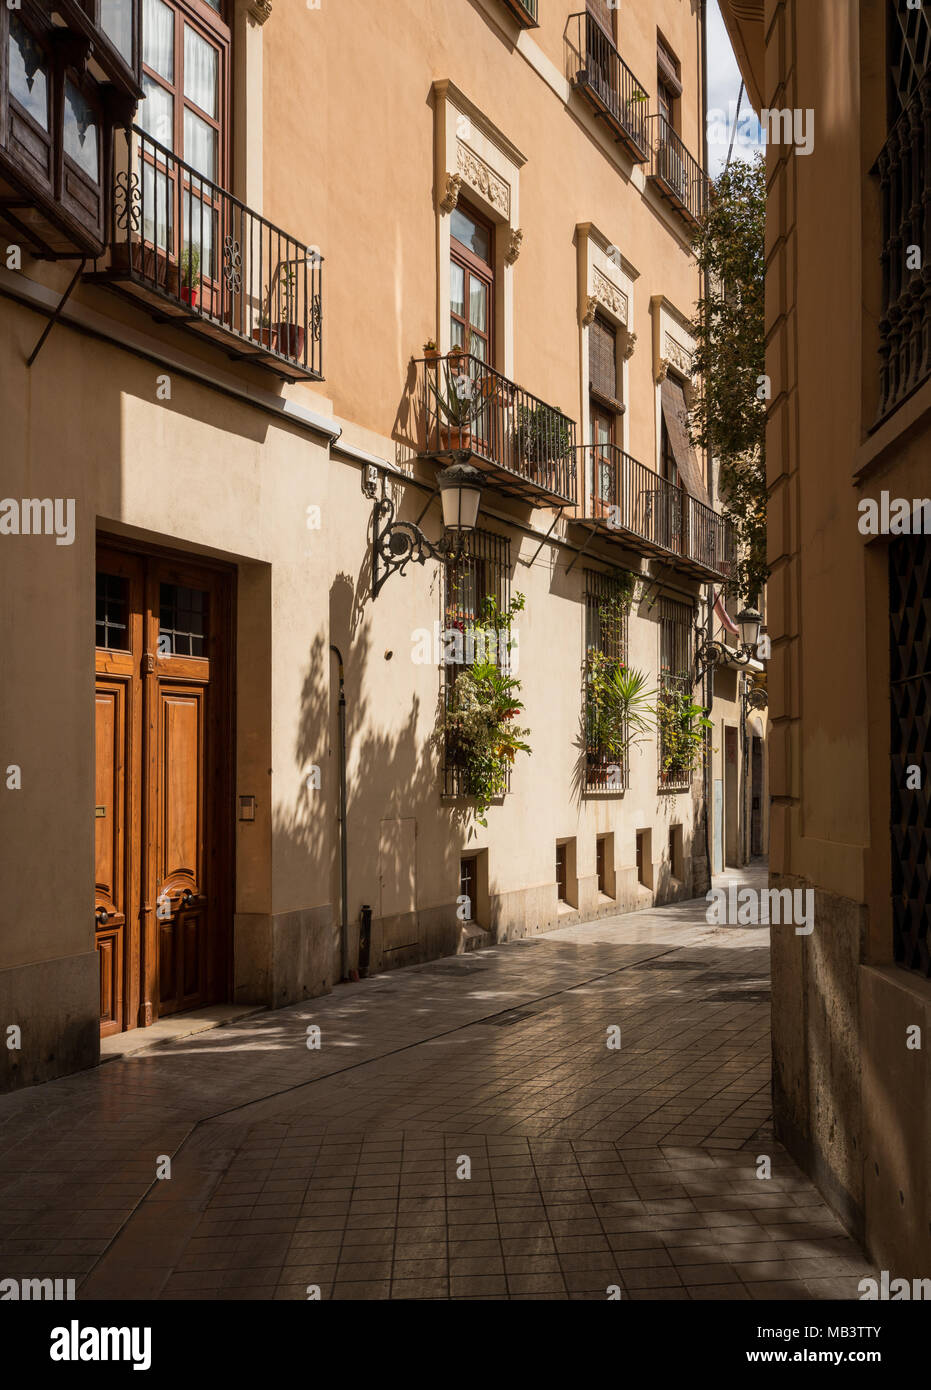 Narrow peaceful street in old town of Valencia Spain Stock Photo